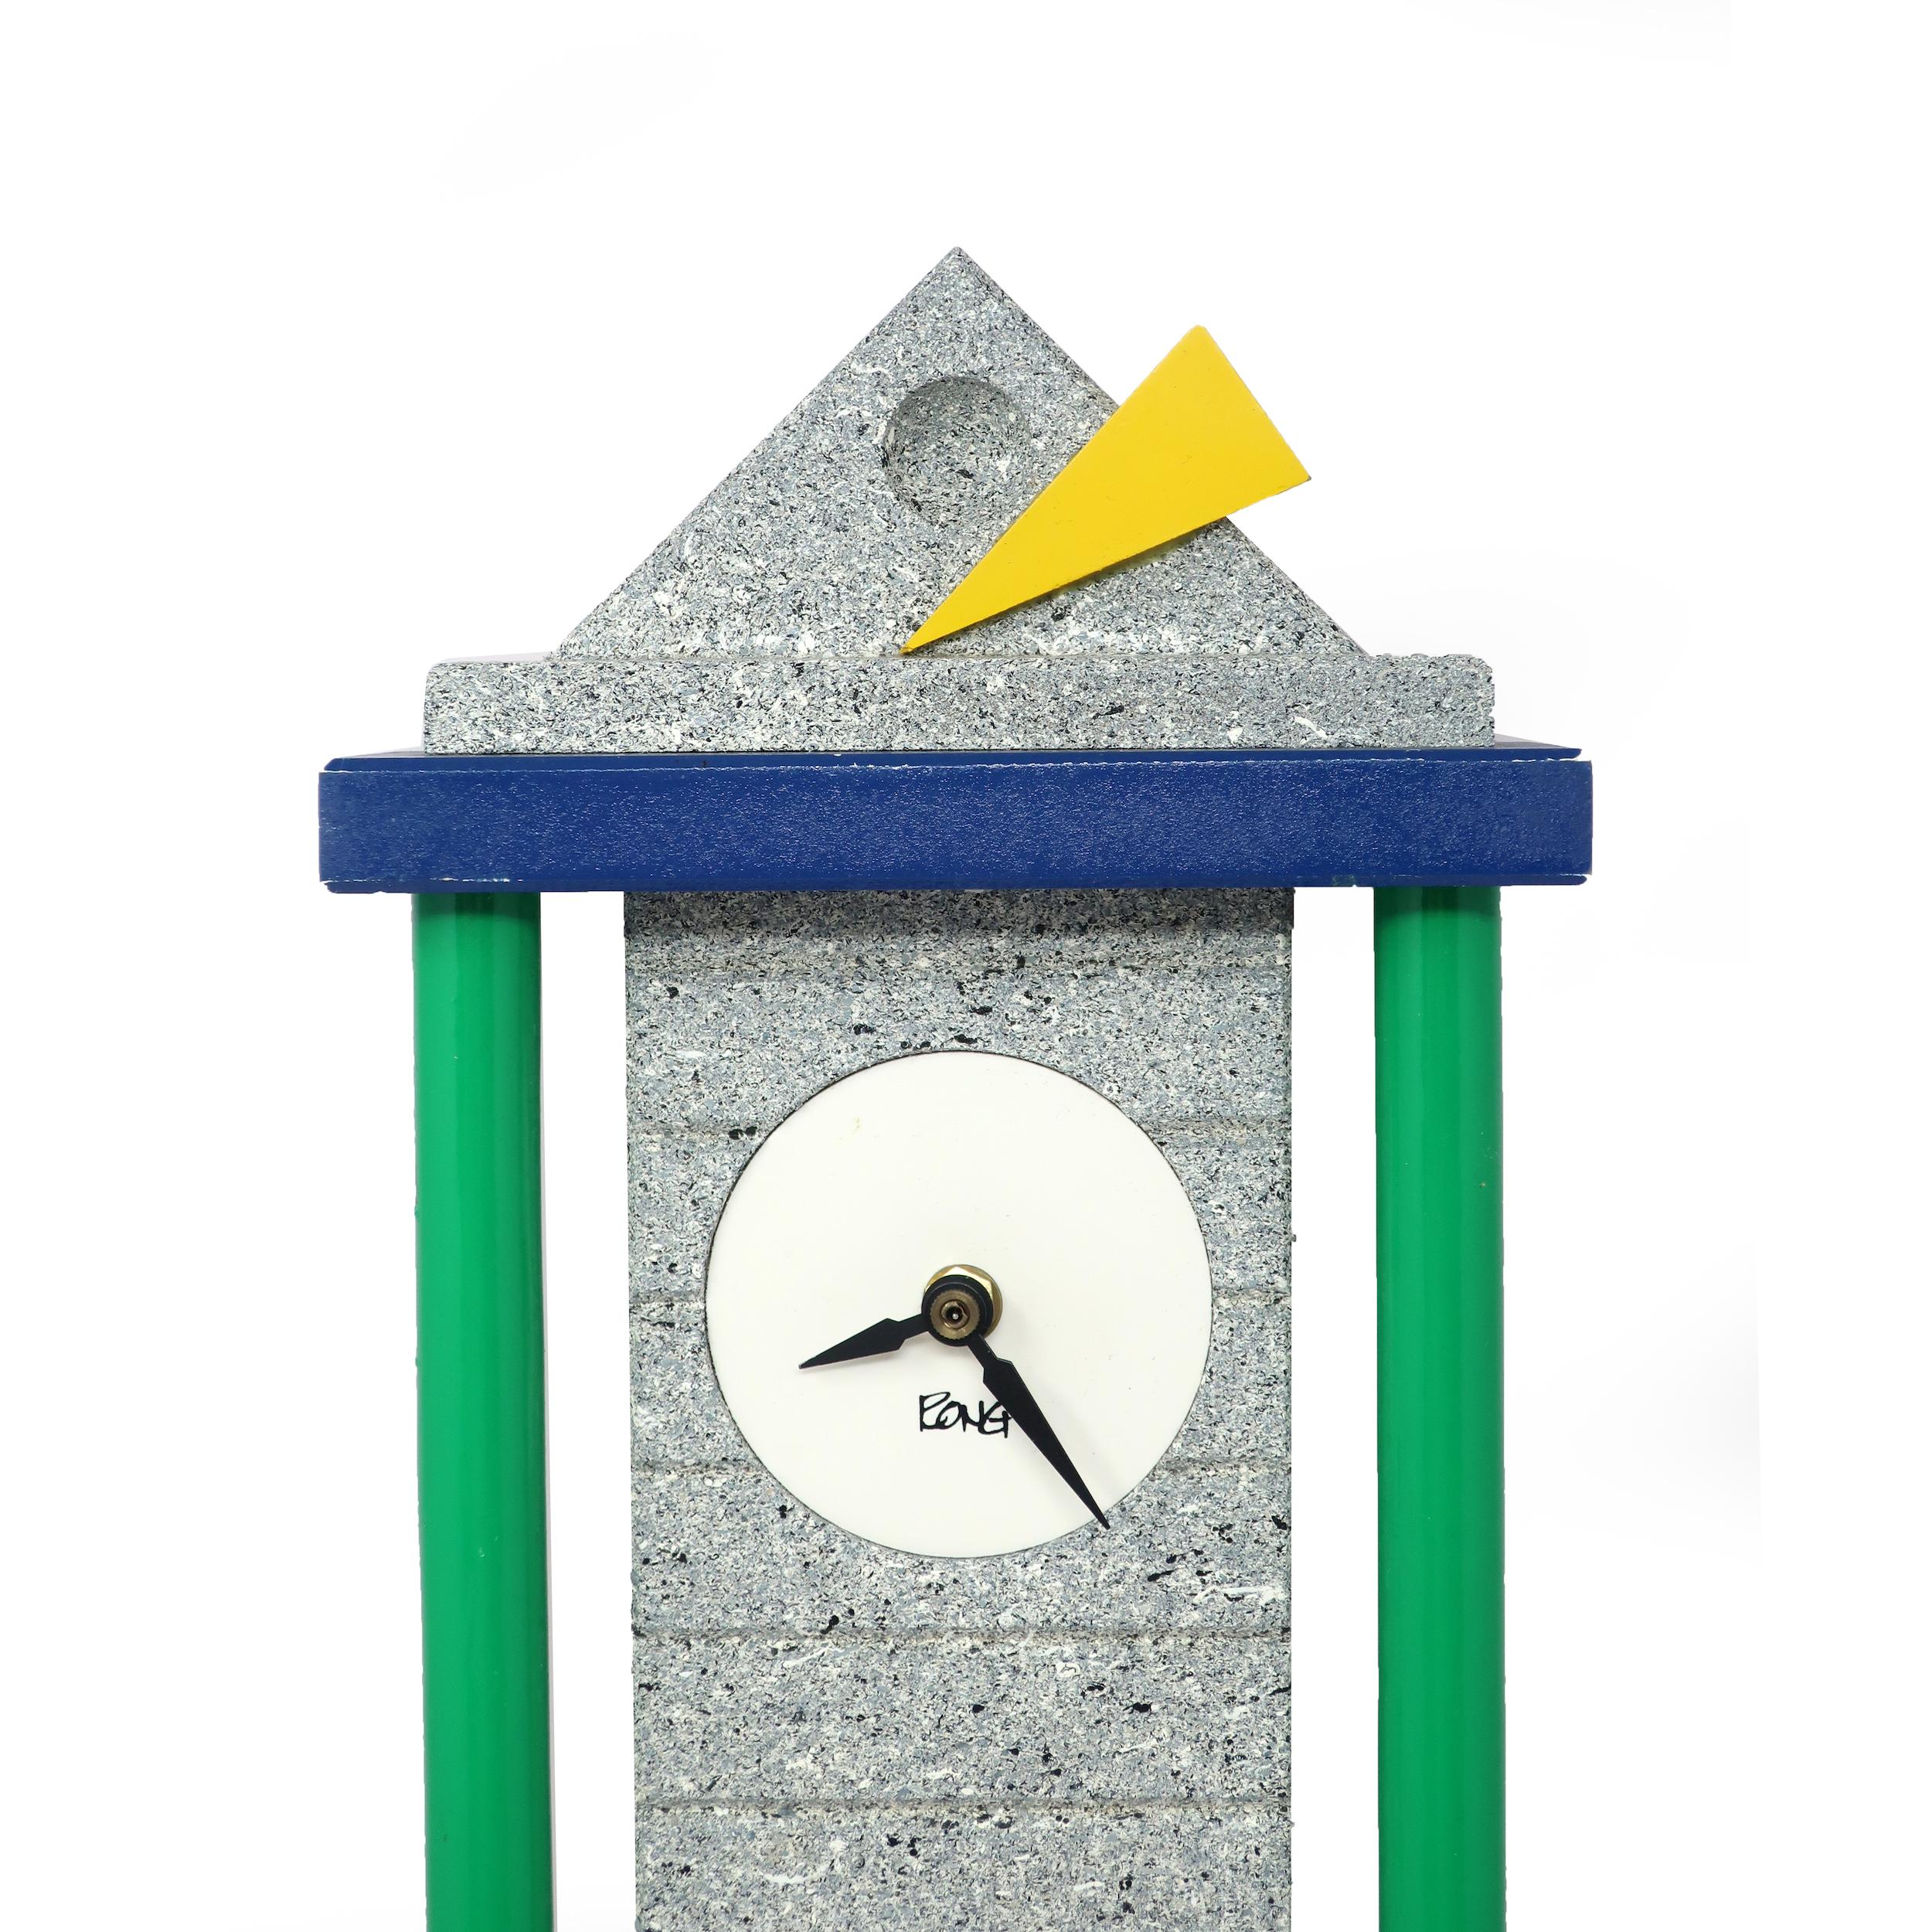 A tall and slim postmodern wall clock with green column, stone textured top and base, white face, black hands, and blue, yellow and red accents. A unique and delightful clock!

In good vintage condition with wear consistent with age and use.